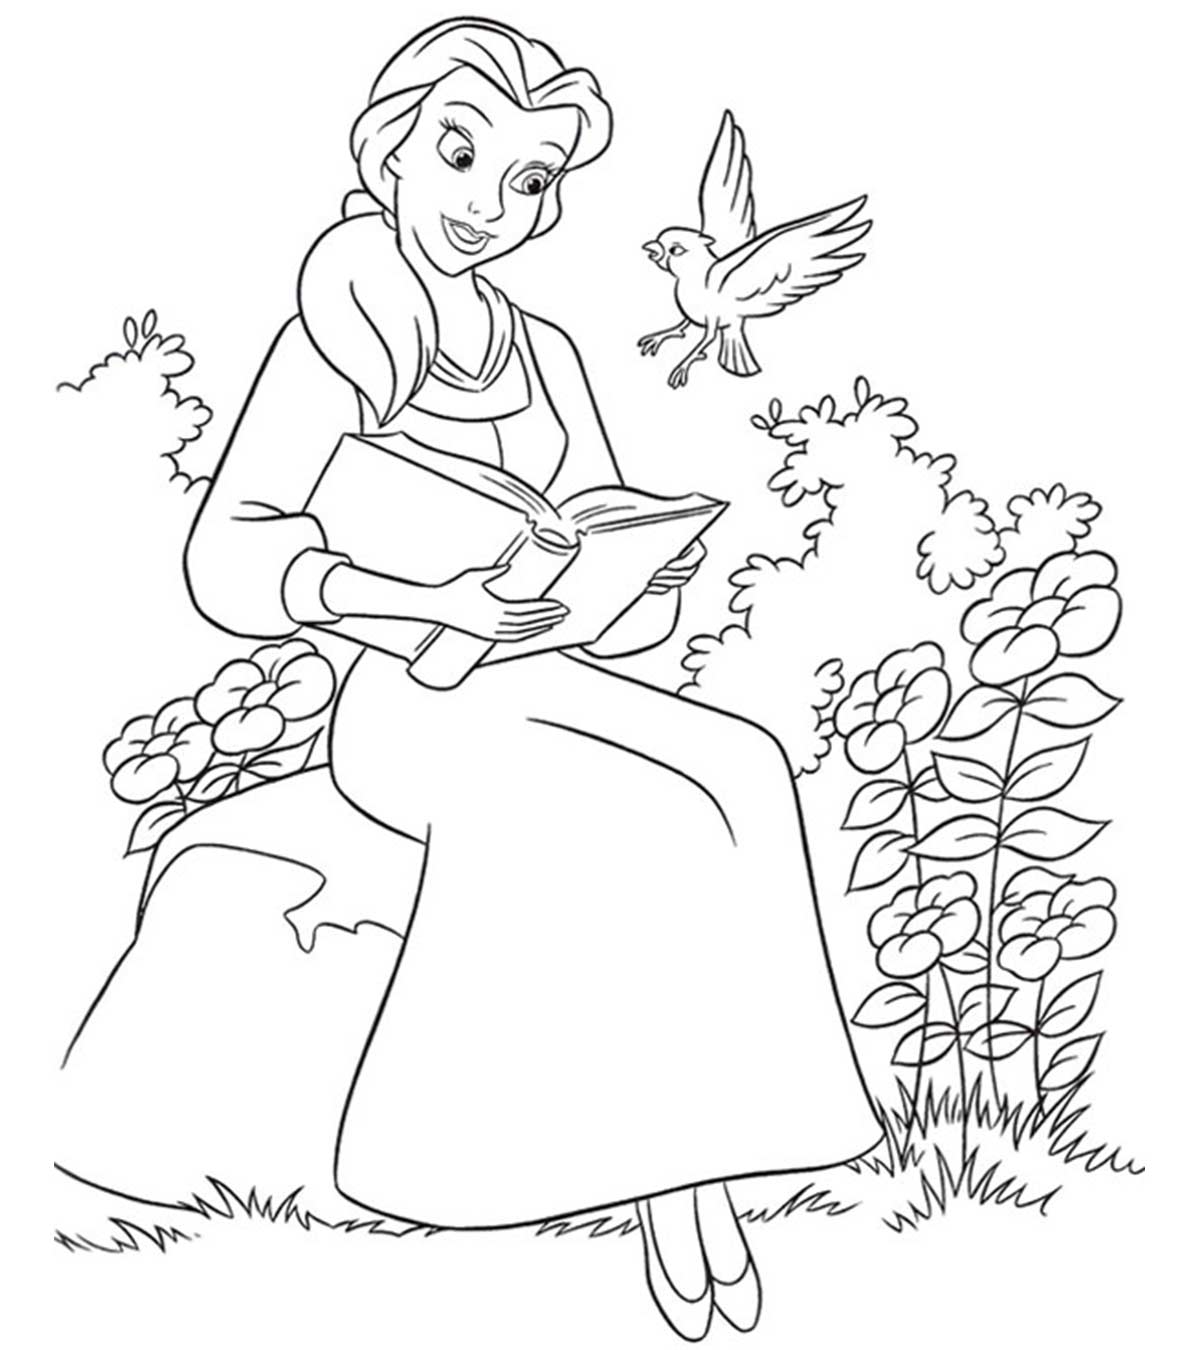 10 Wonderful Beauty And The Beast Coloring Pages For Your Toddler